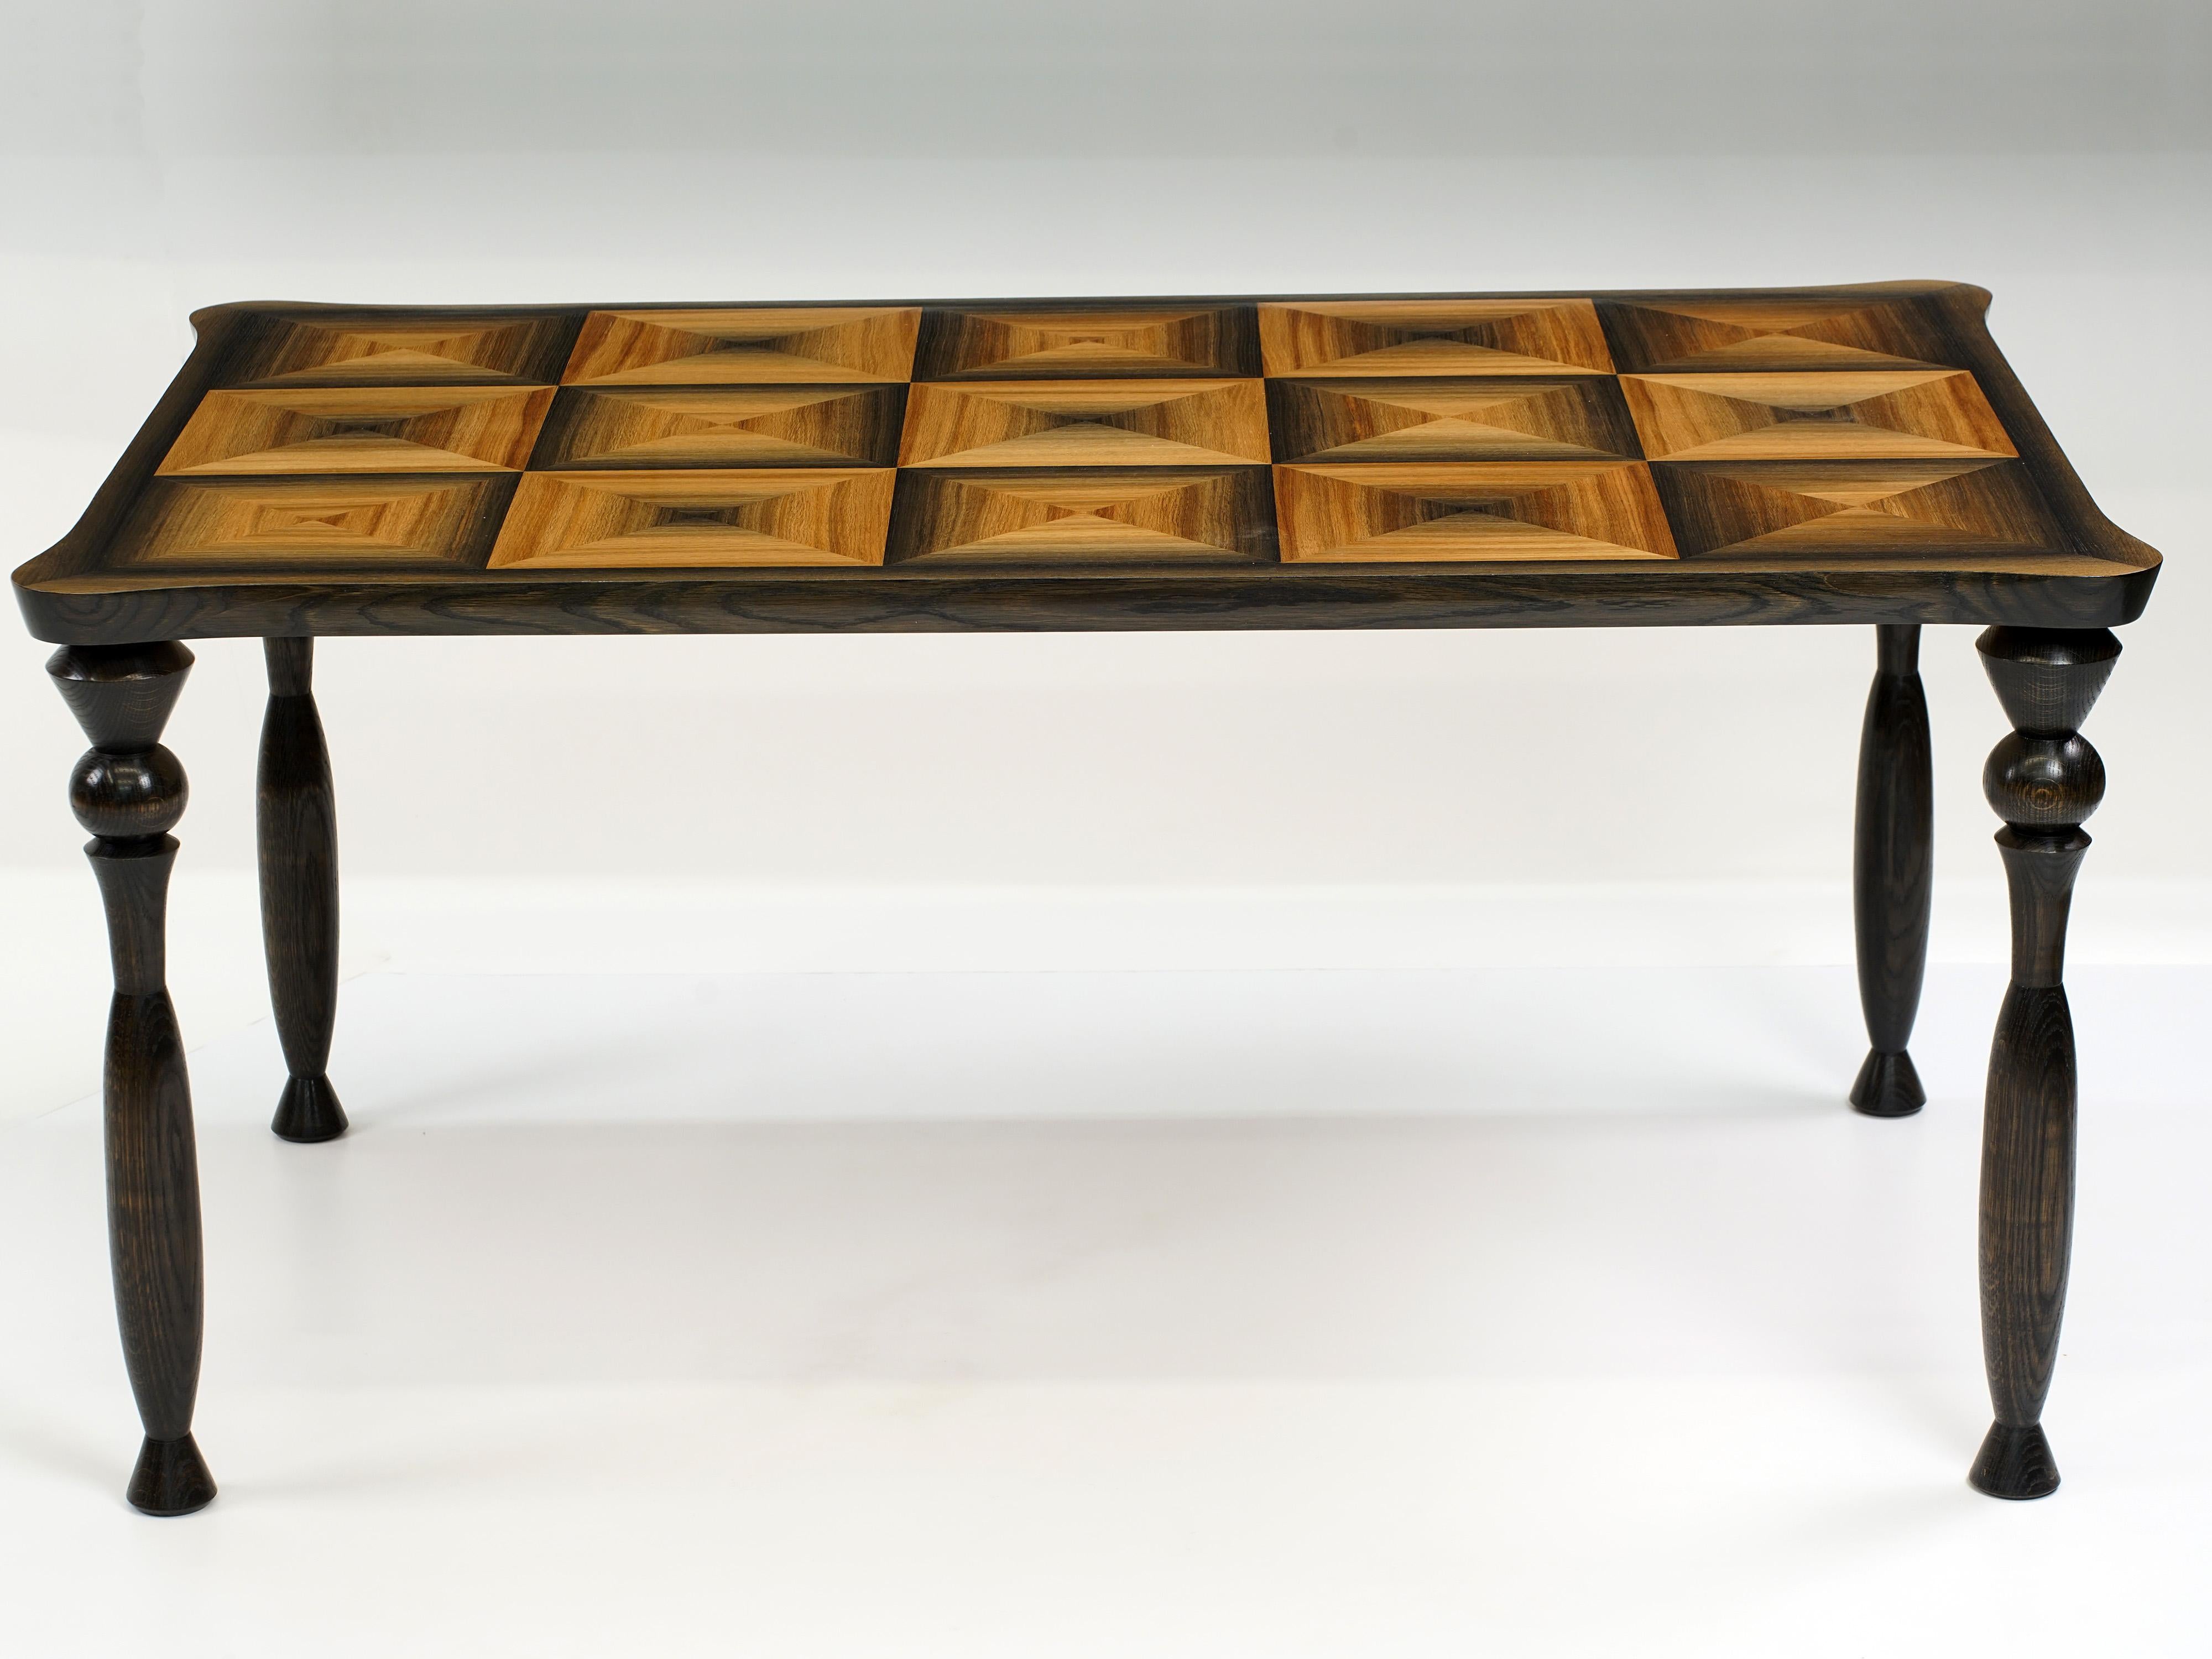 A tabletop is an opportunity to display the beauty of whatever material 
it is fashioned from, and this piece does not disappoint. The striking 
beauty 1200 year old bog oak, sawn into thick veneers and arranged in a 
marquetry pattern of squares